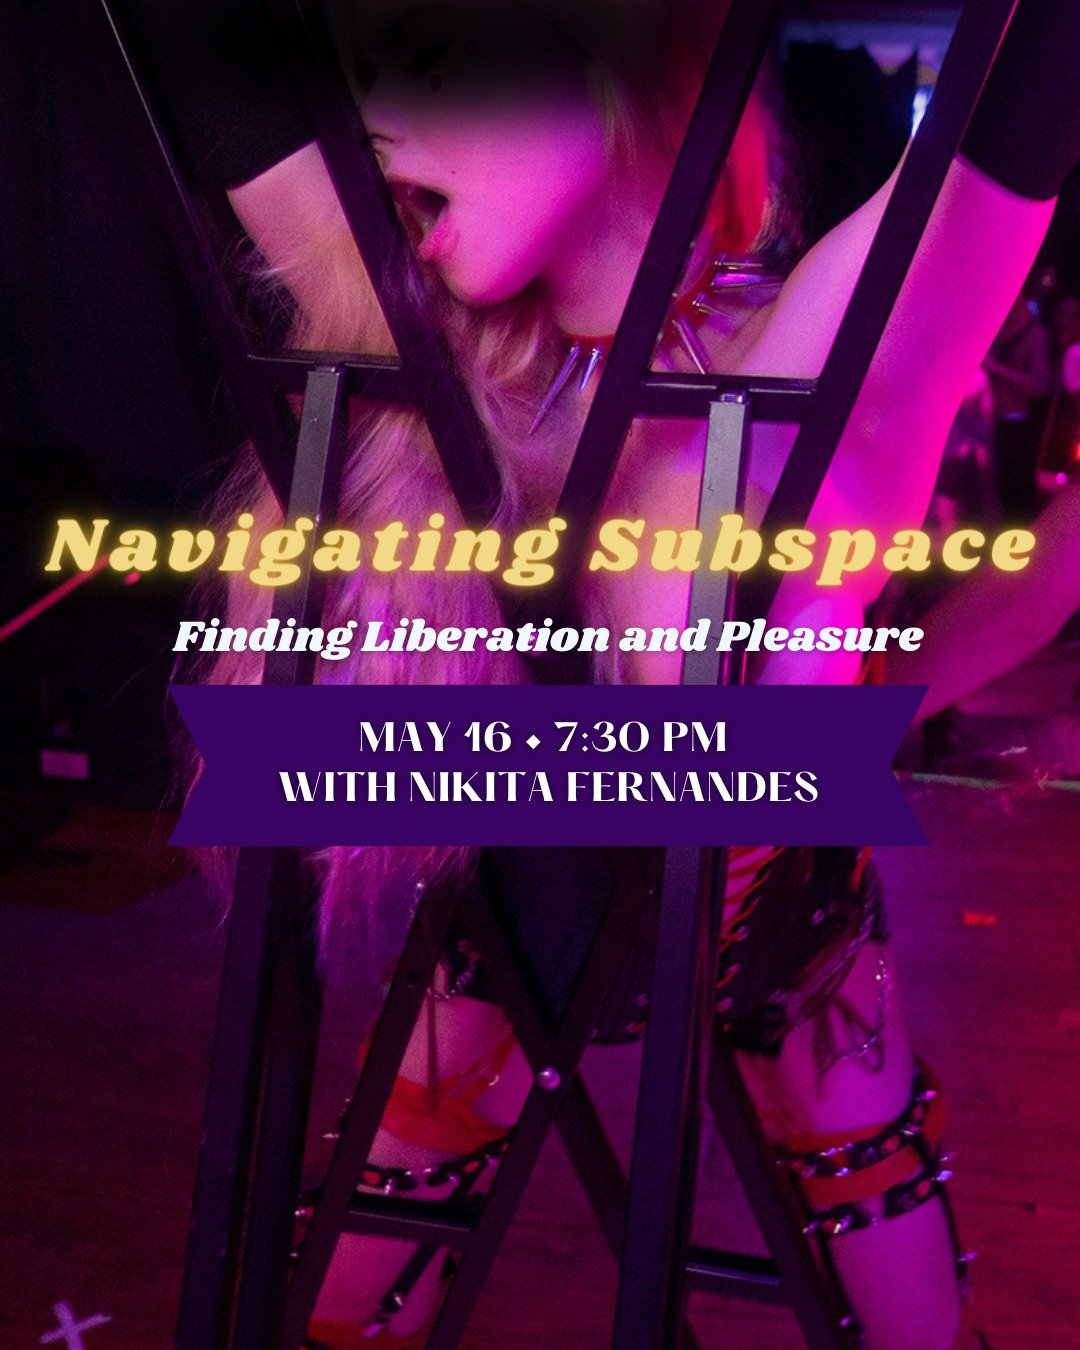 If you're curious about the psychological benefits of subspace &amp; power dynamics through a strength's based perspective, this one's for you. You know where to go for the link!

💥 UPCOMING EVENTS 💥
📅 May 15: HMU Academy: Latex Intensive + Mixer 